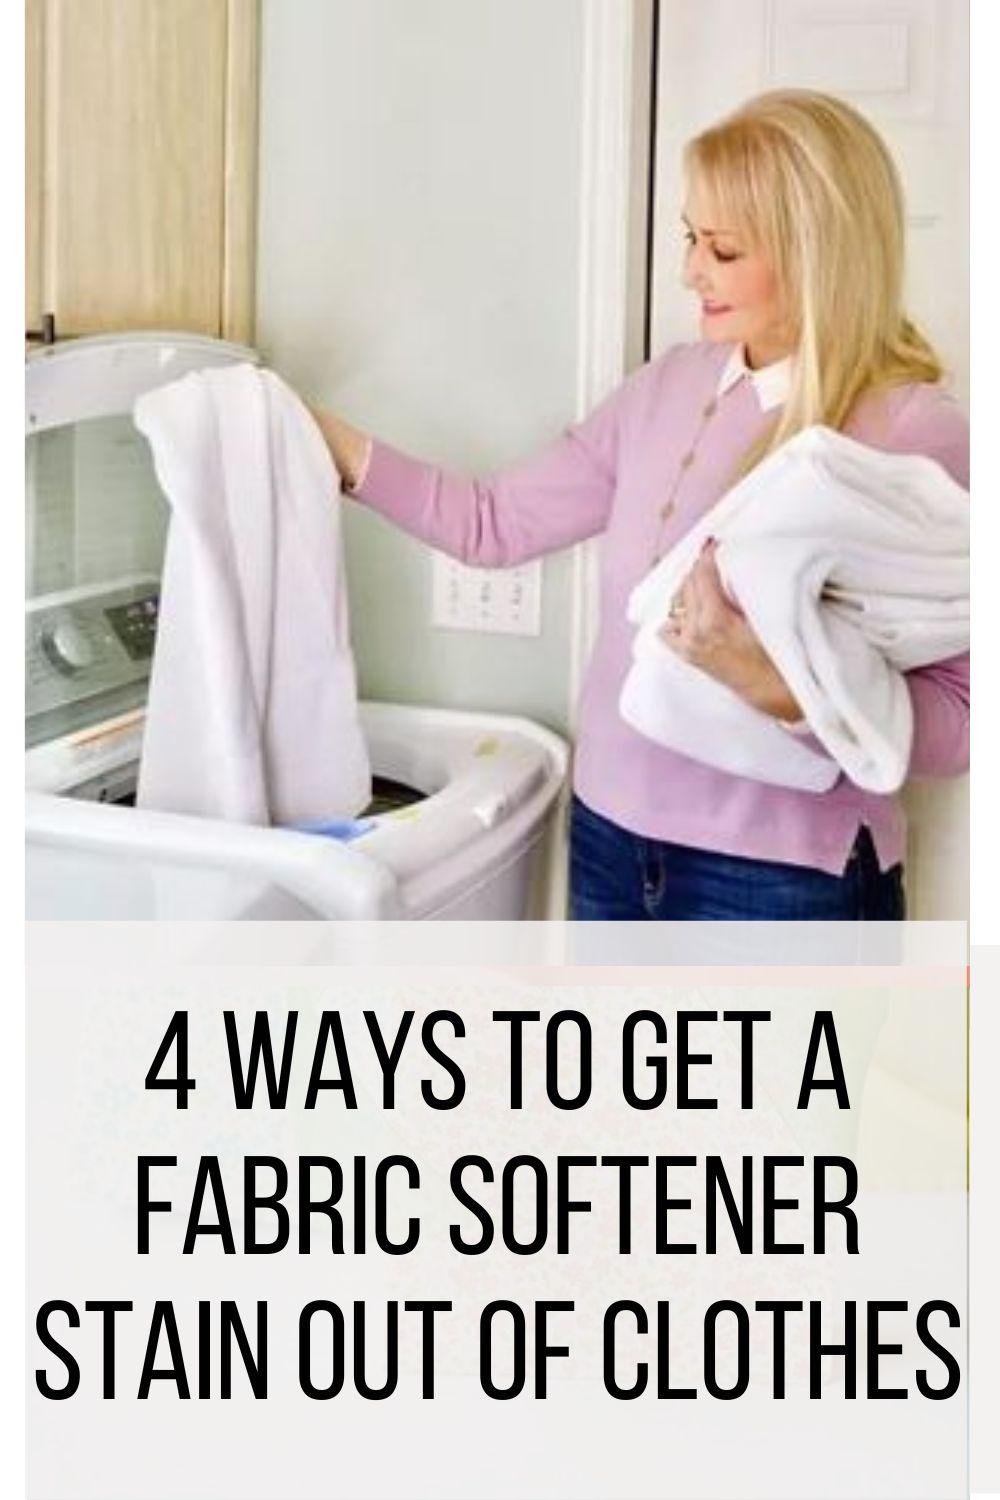 4 Ways to Get a Fabric Softener Stain Out of Clothes